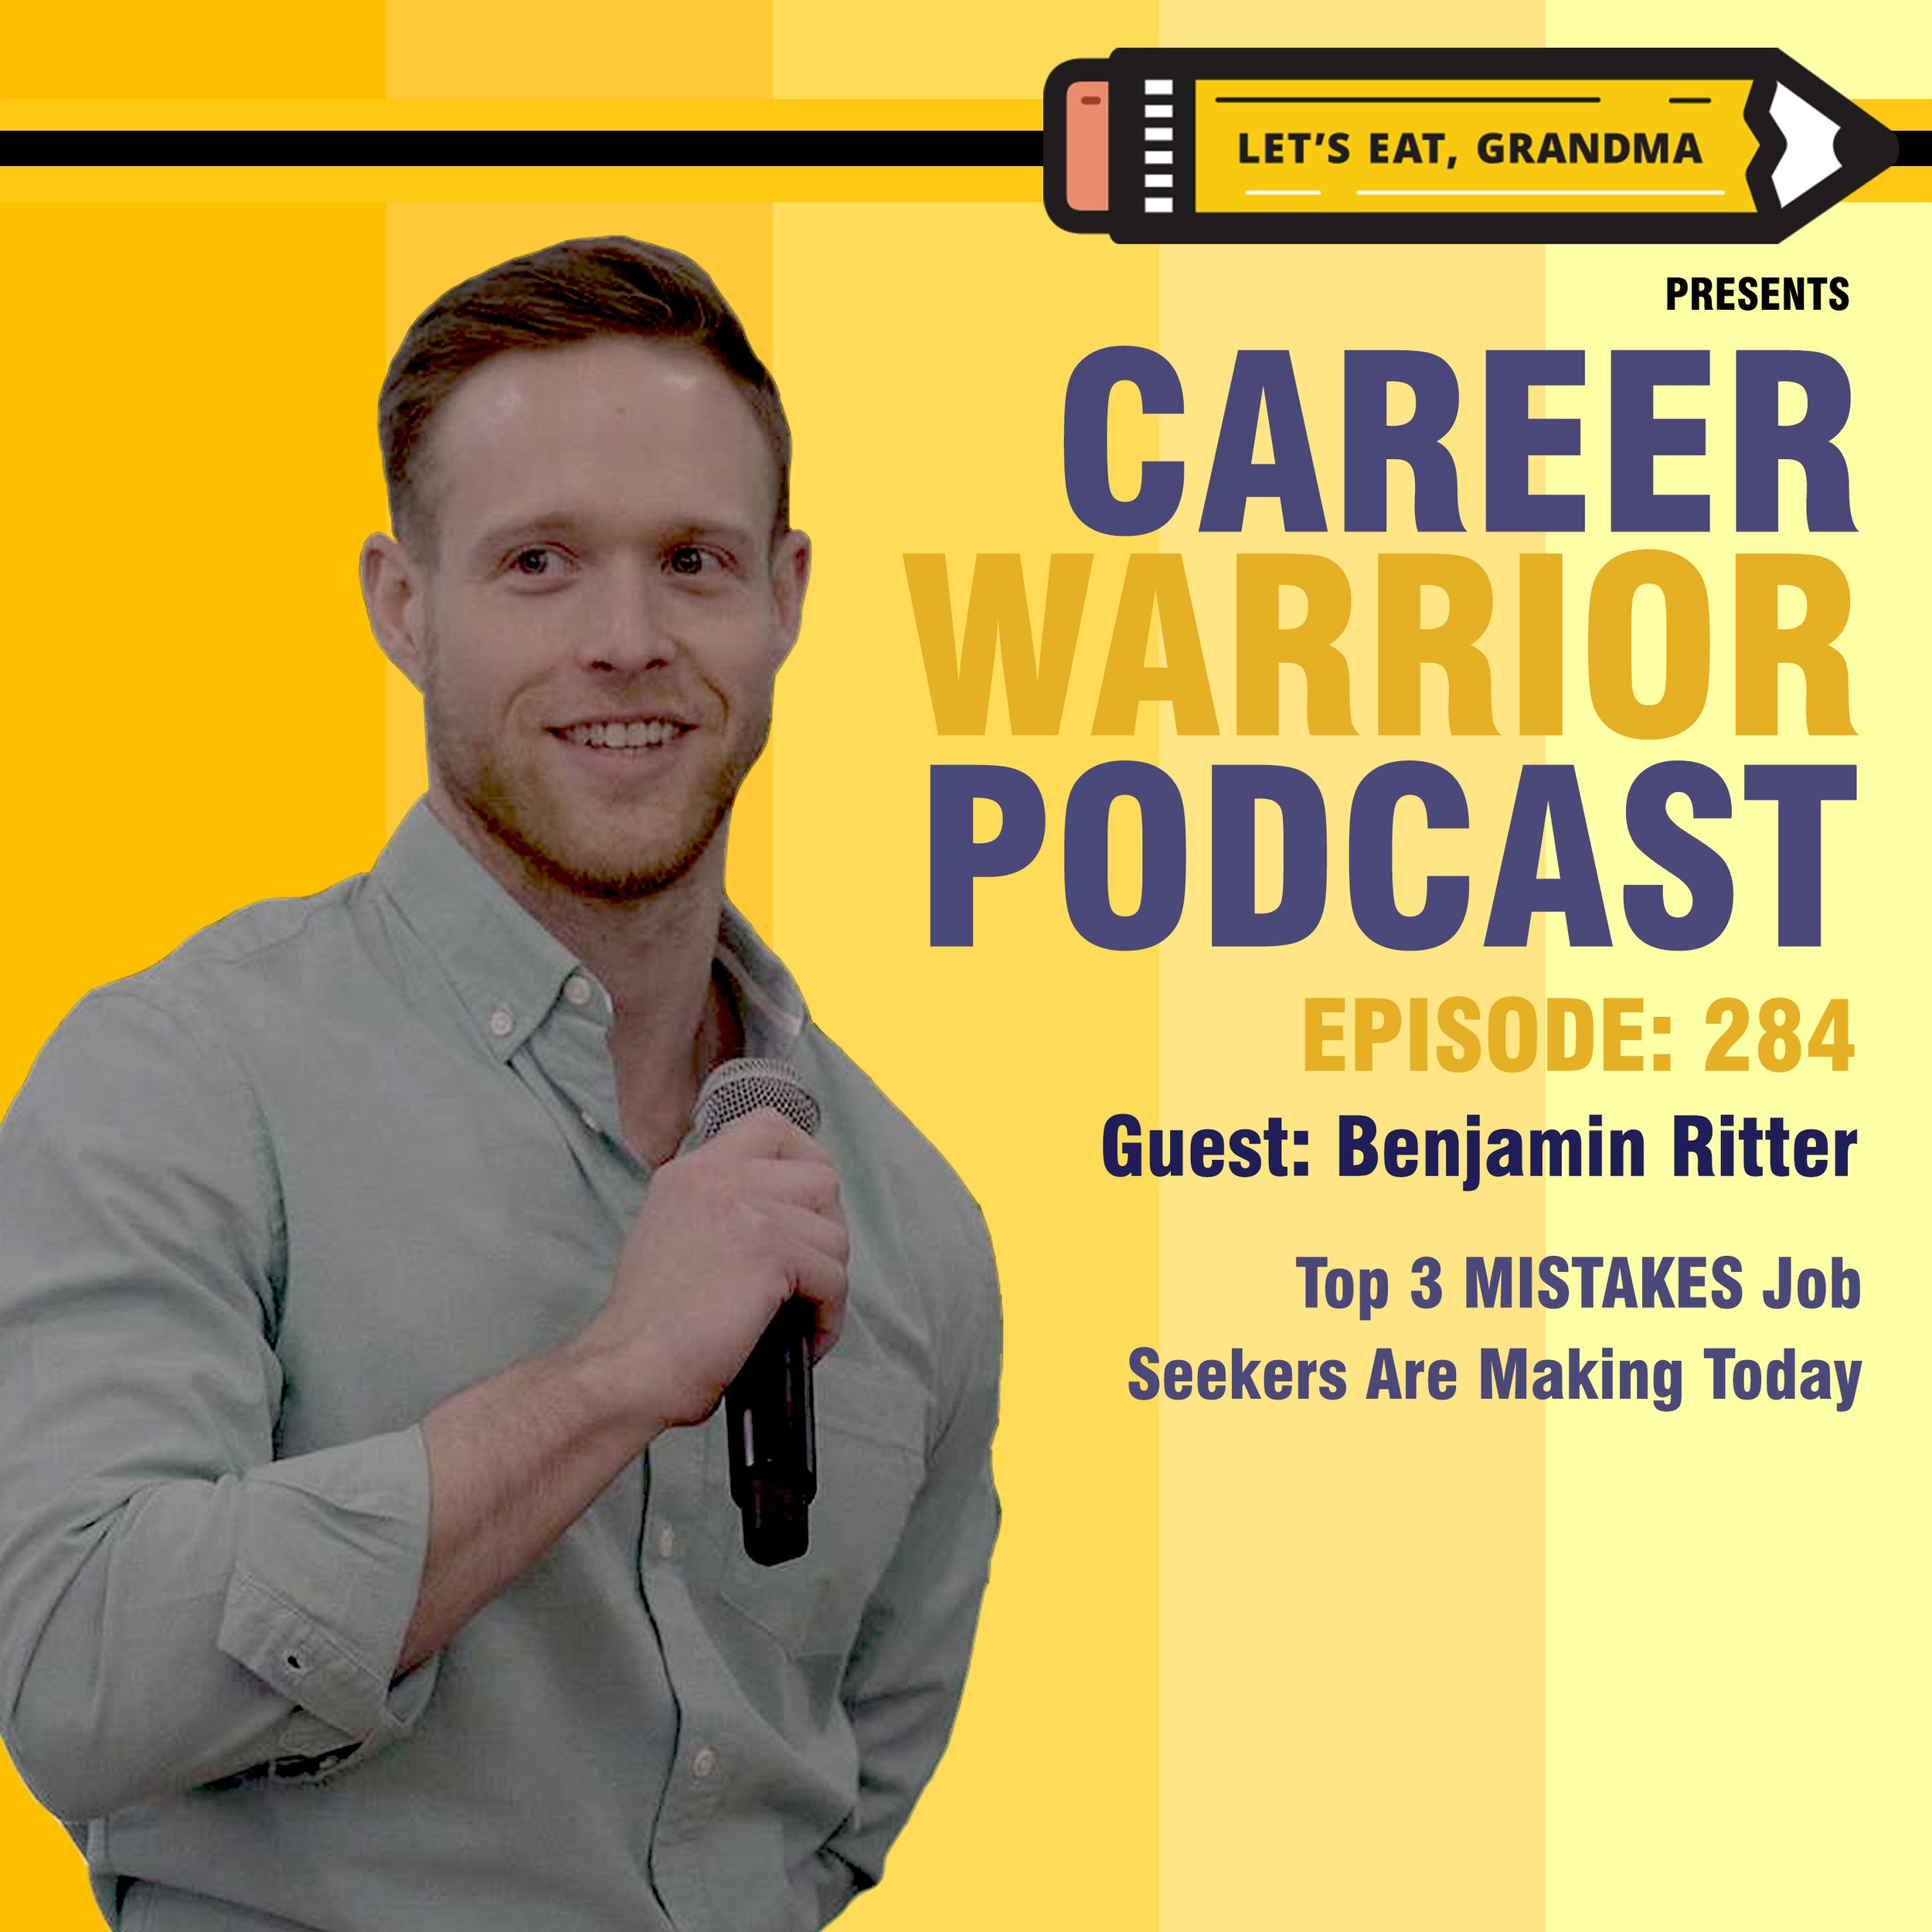 Career Warrior Podcast #284) Top 3 MISTAKES Job Seekers Are Making Today